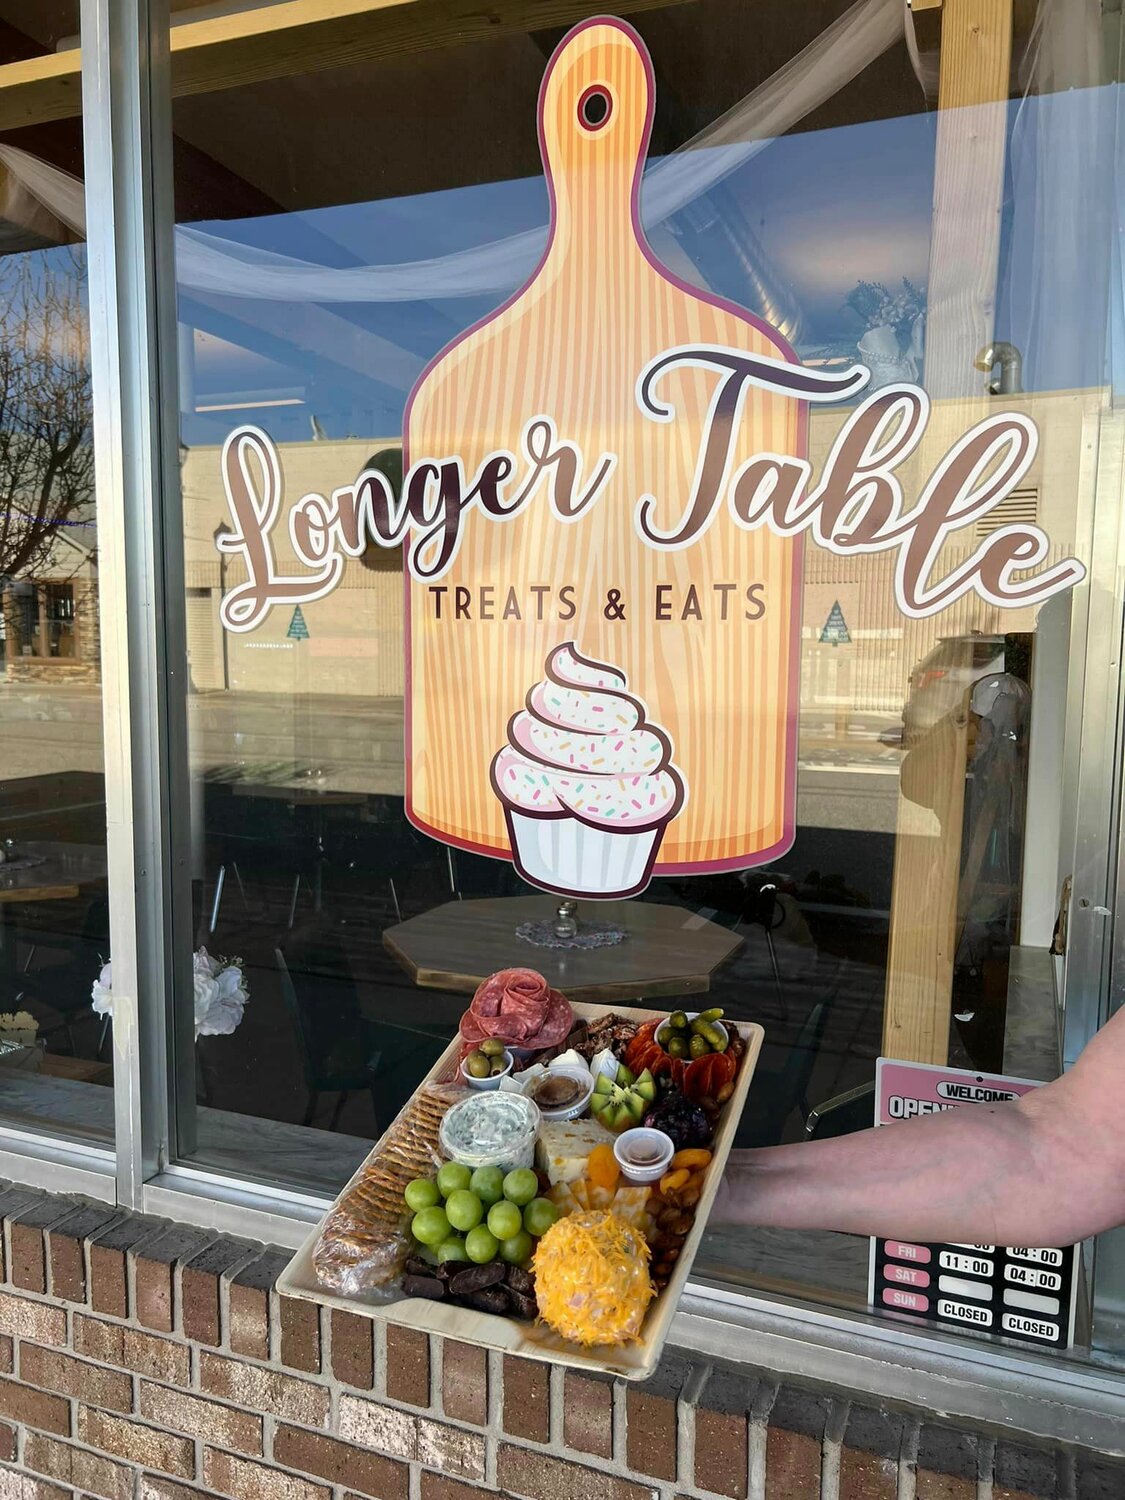 Longer Table is located at 121 E Main St, Harrison, Michigan